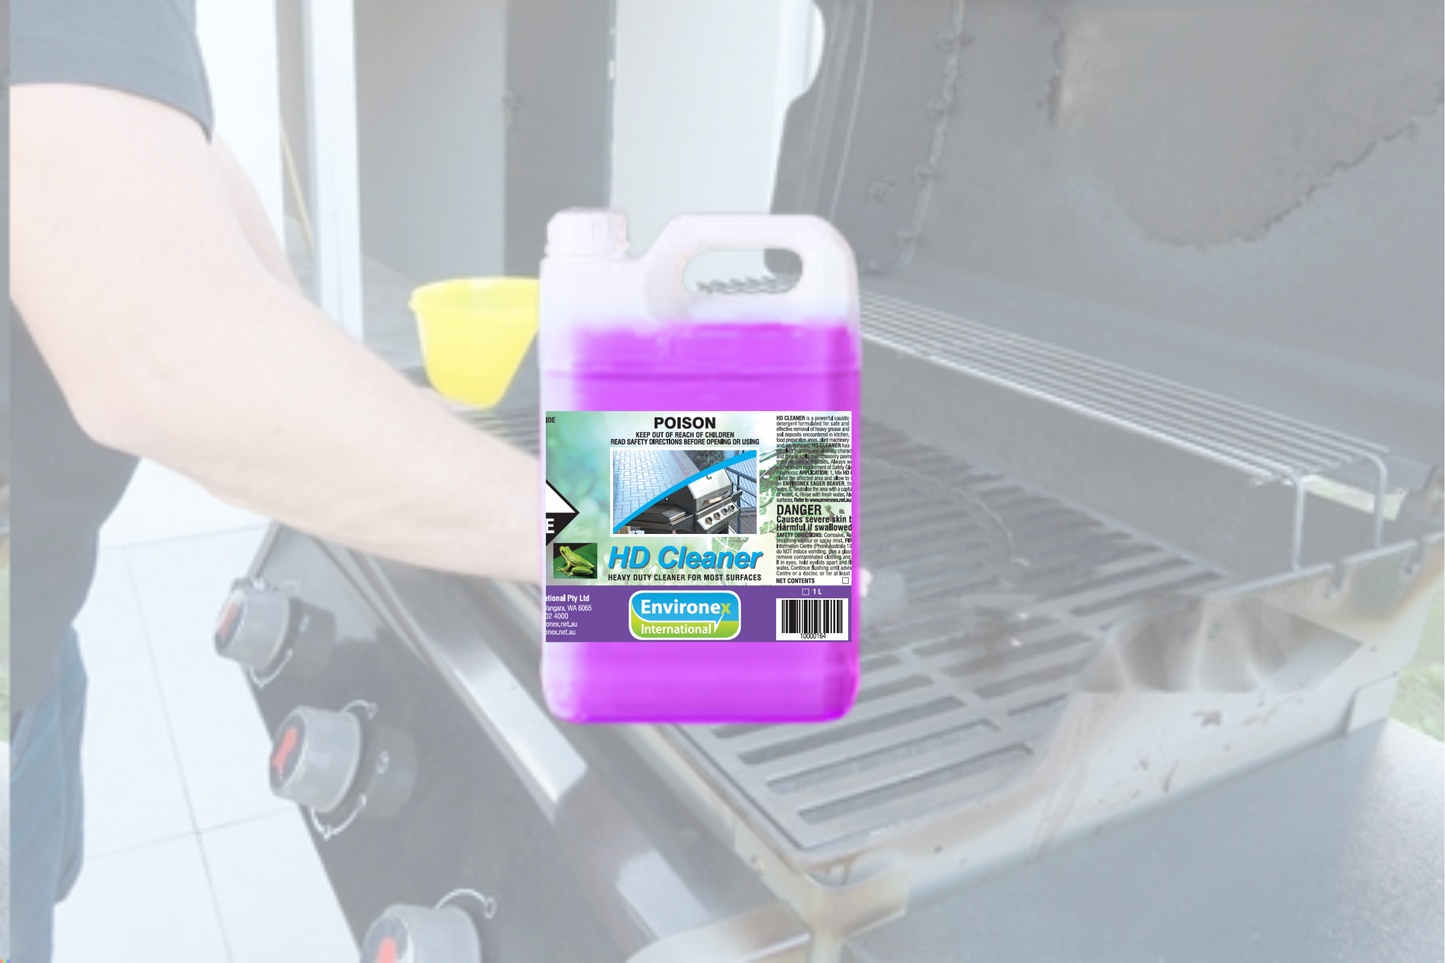 HD Cleaner : Heavy-duty cleaner and degreaser